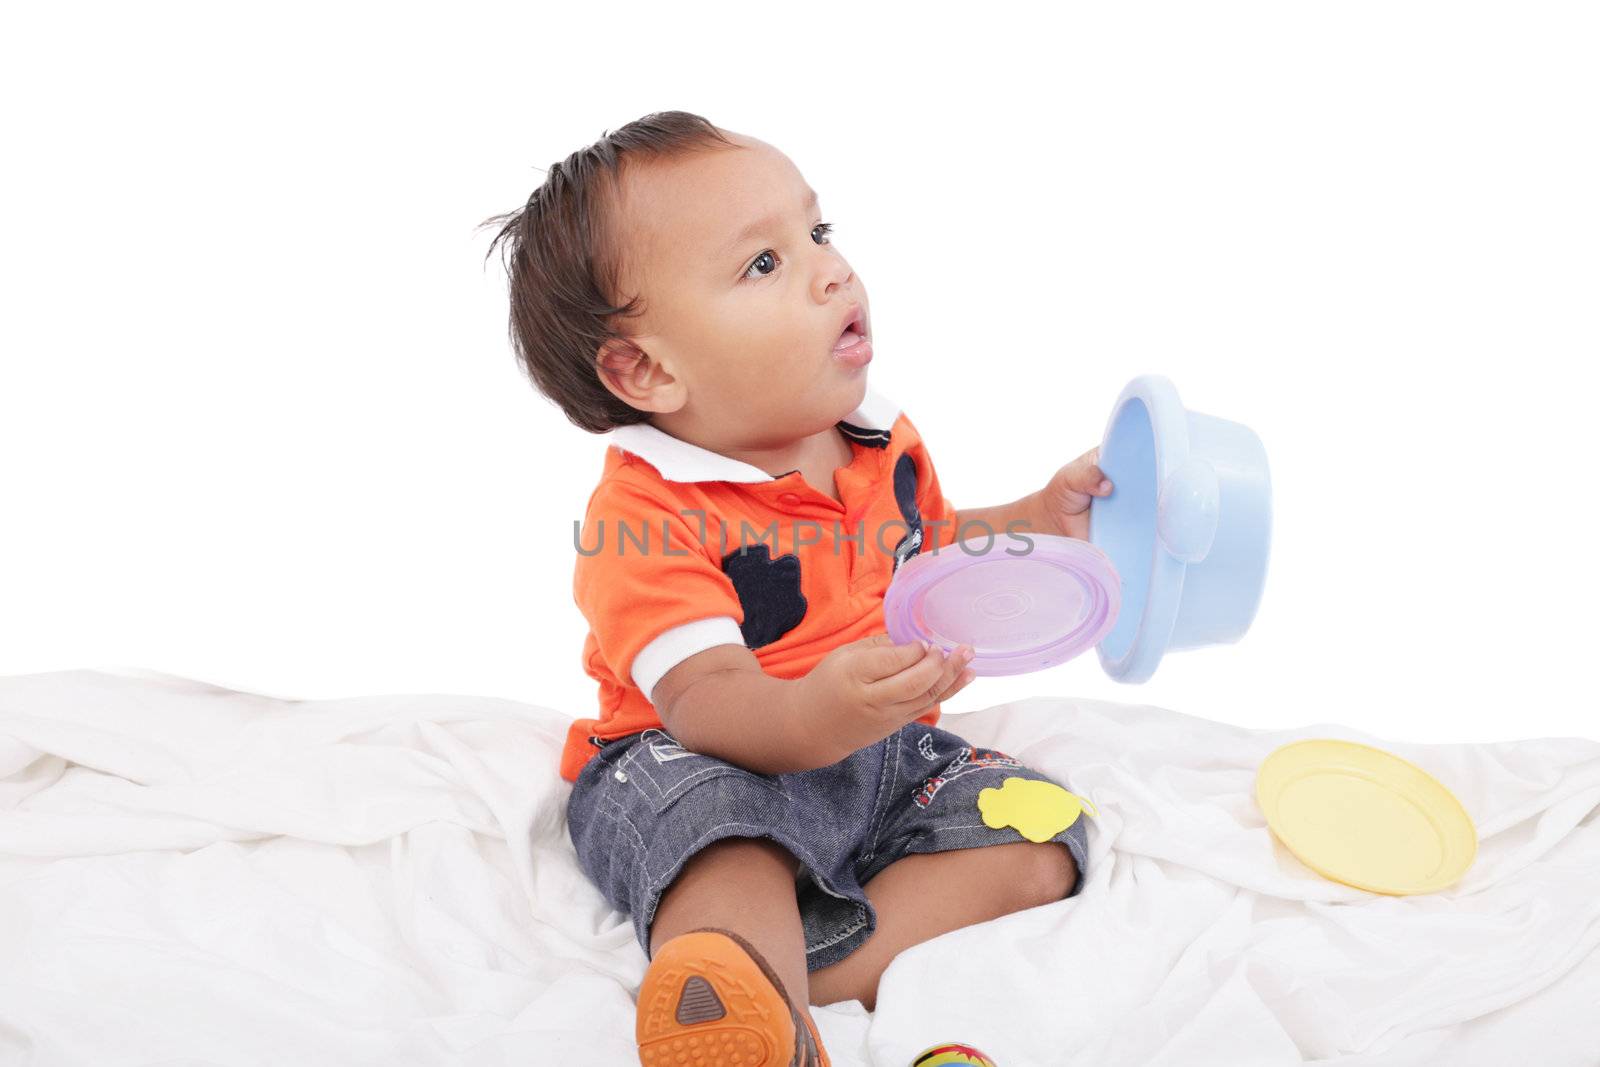 Adorable One Year Old Boy Playing Toy Isolated